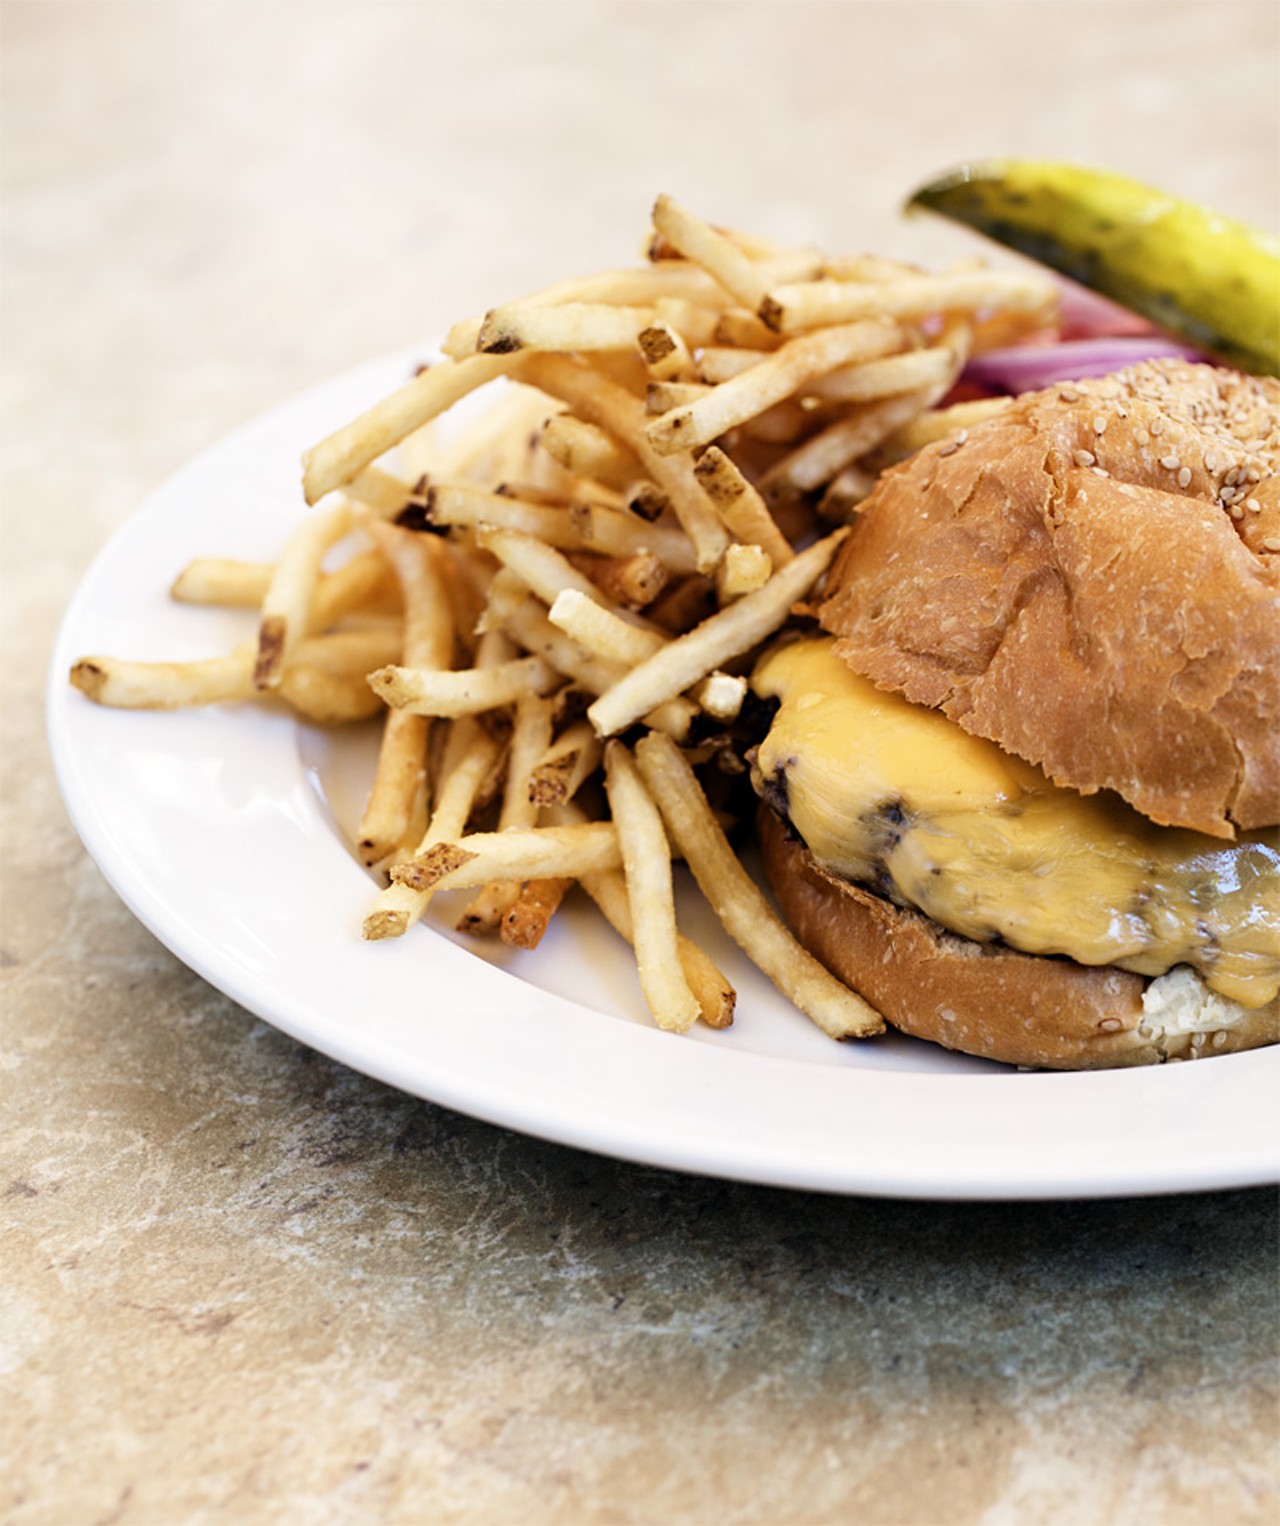 Chef Dave's Griddle Burger is a 1/2 lb griddle seared sirloin served with lettuce, tomato, onion and shown here with American cheese and fries.